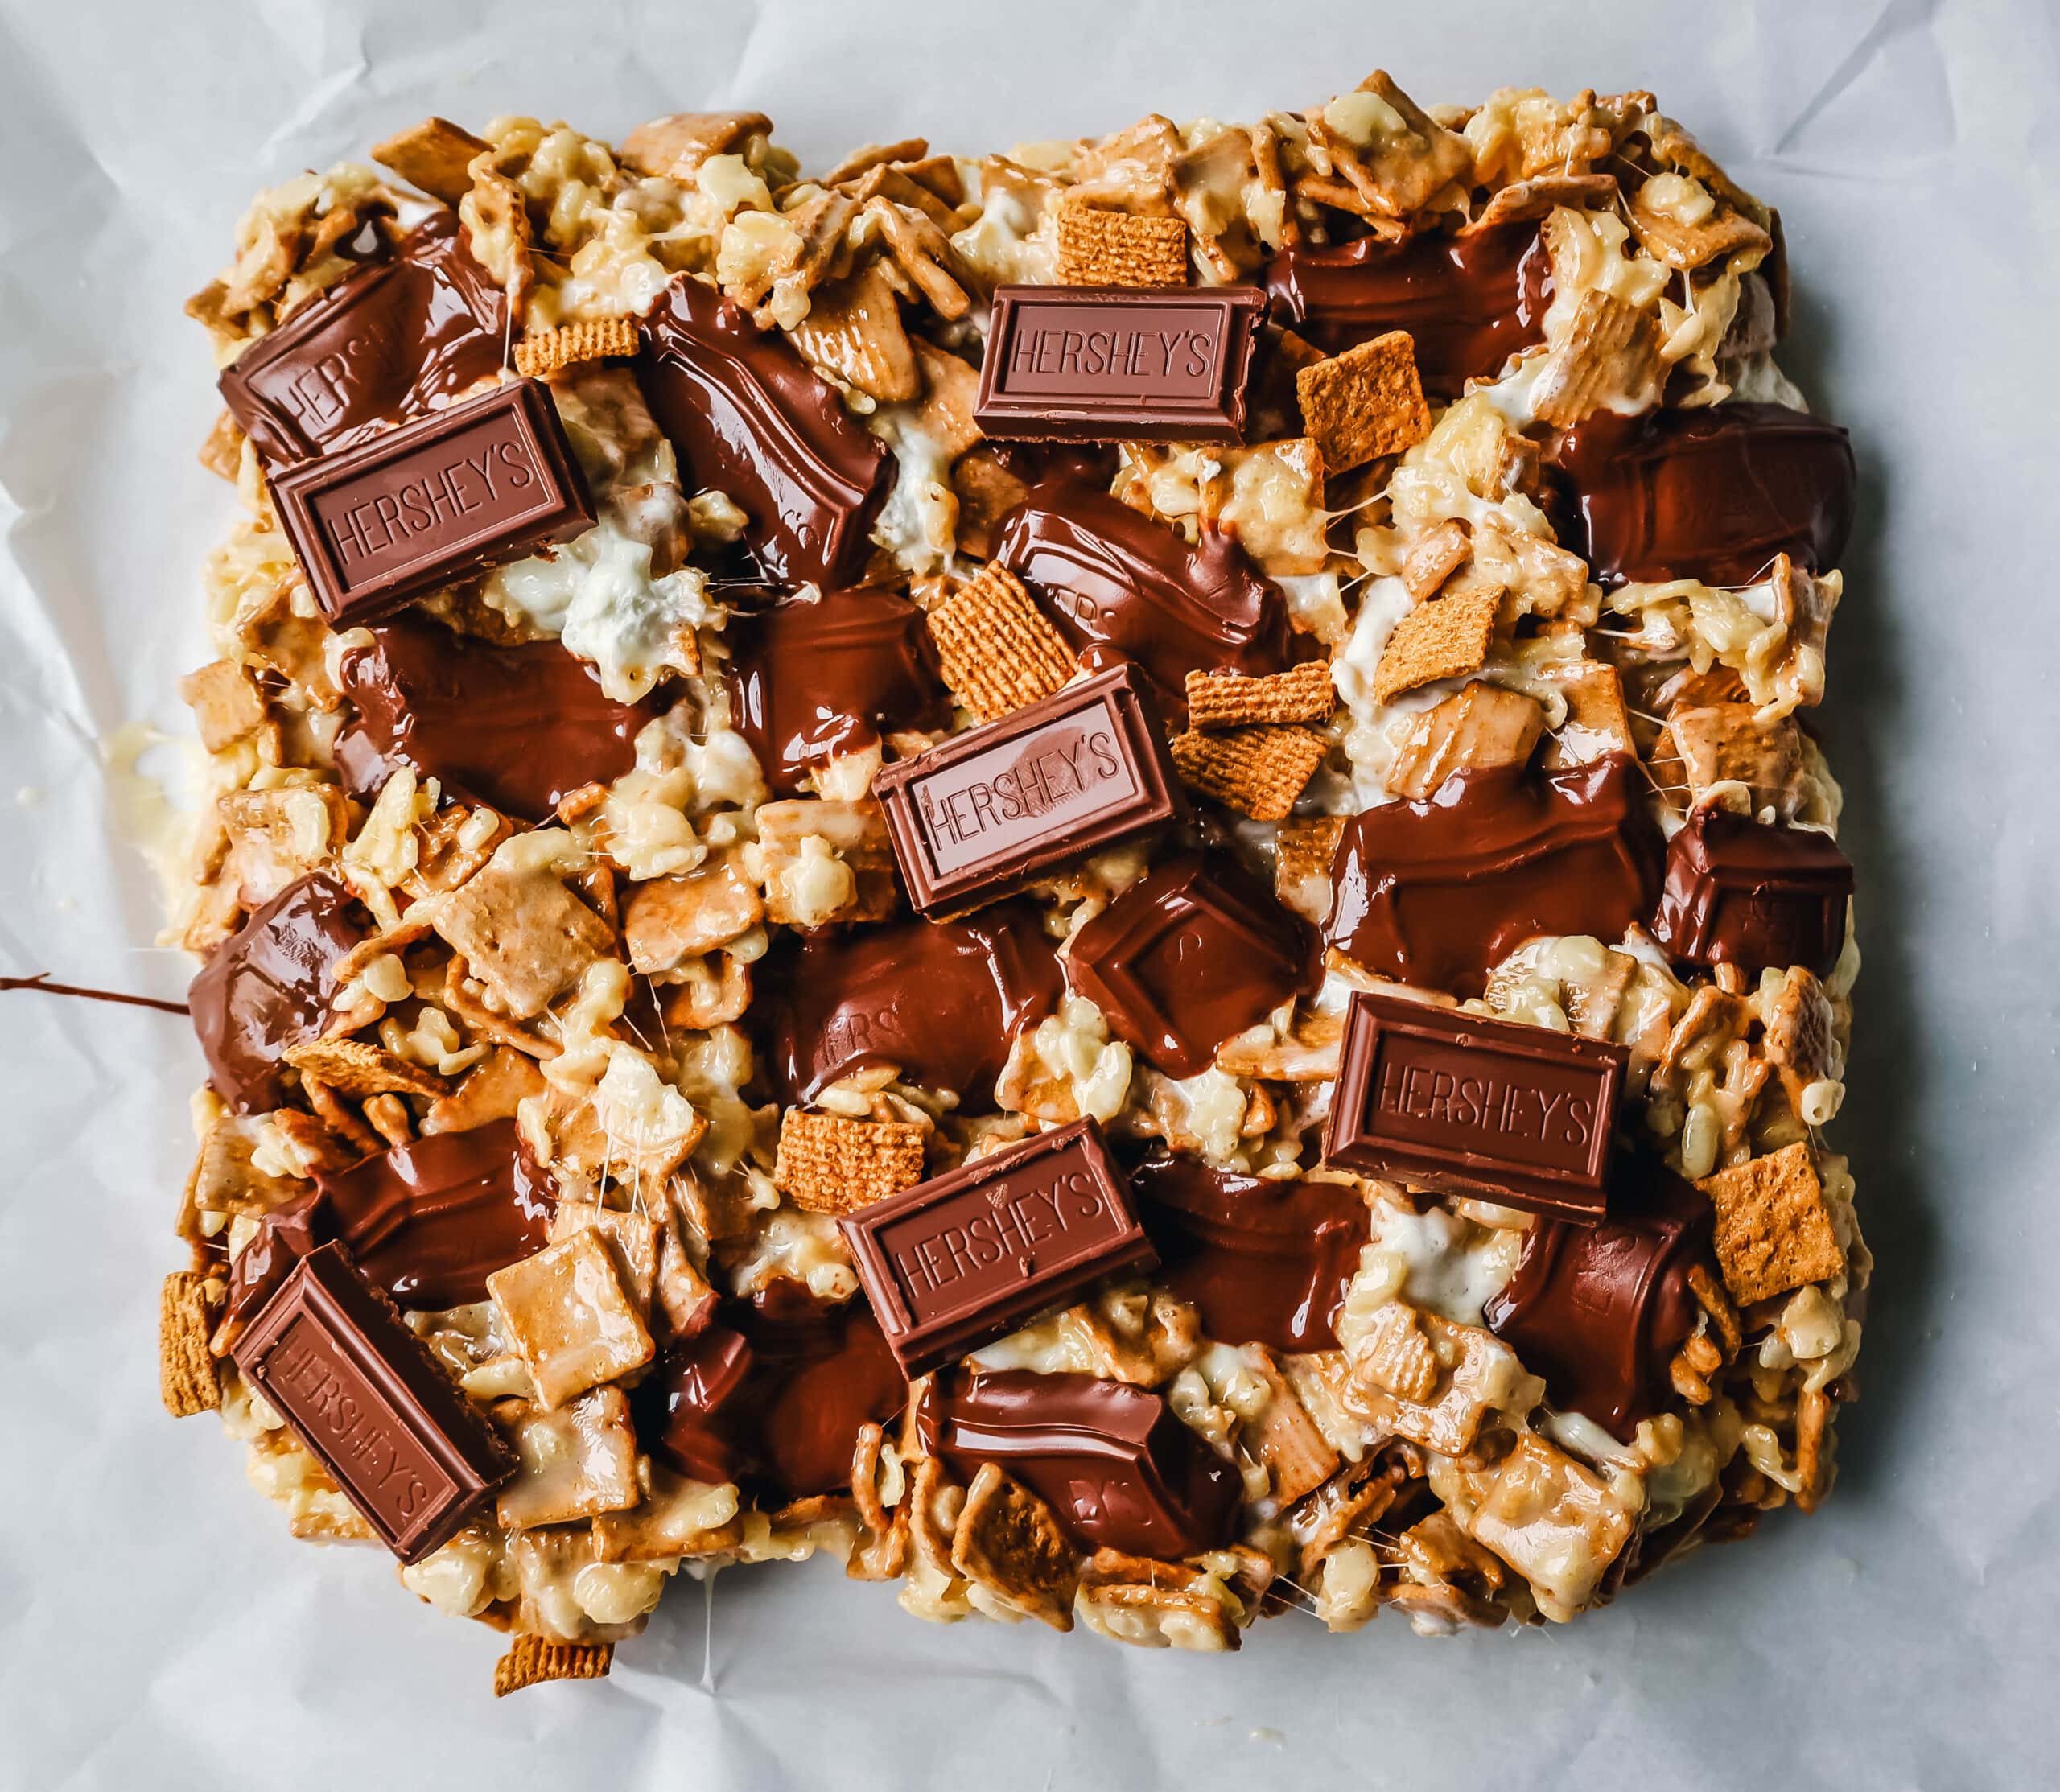 S'more Rice Krispie Treats made with Golden Graham, Rice Krispies, Marshmallows, Butter, and Hershey's Milk Chocolate Bars. The perfect S'more Rice Krispies that can be made in less than 15 minutes!